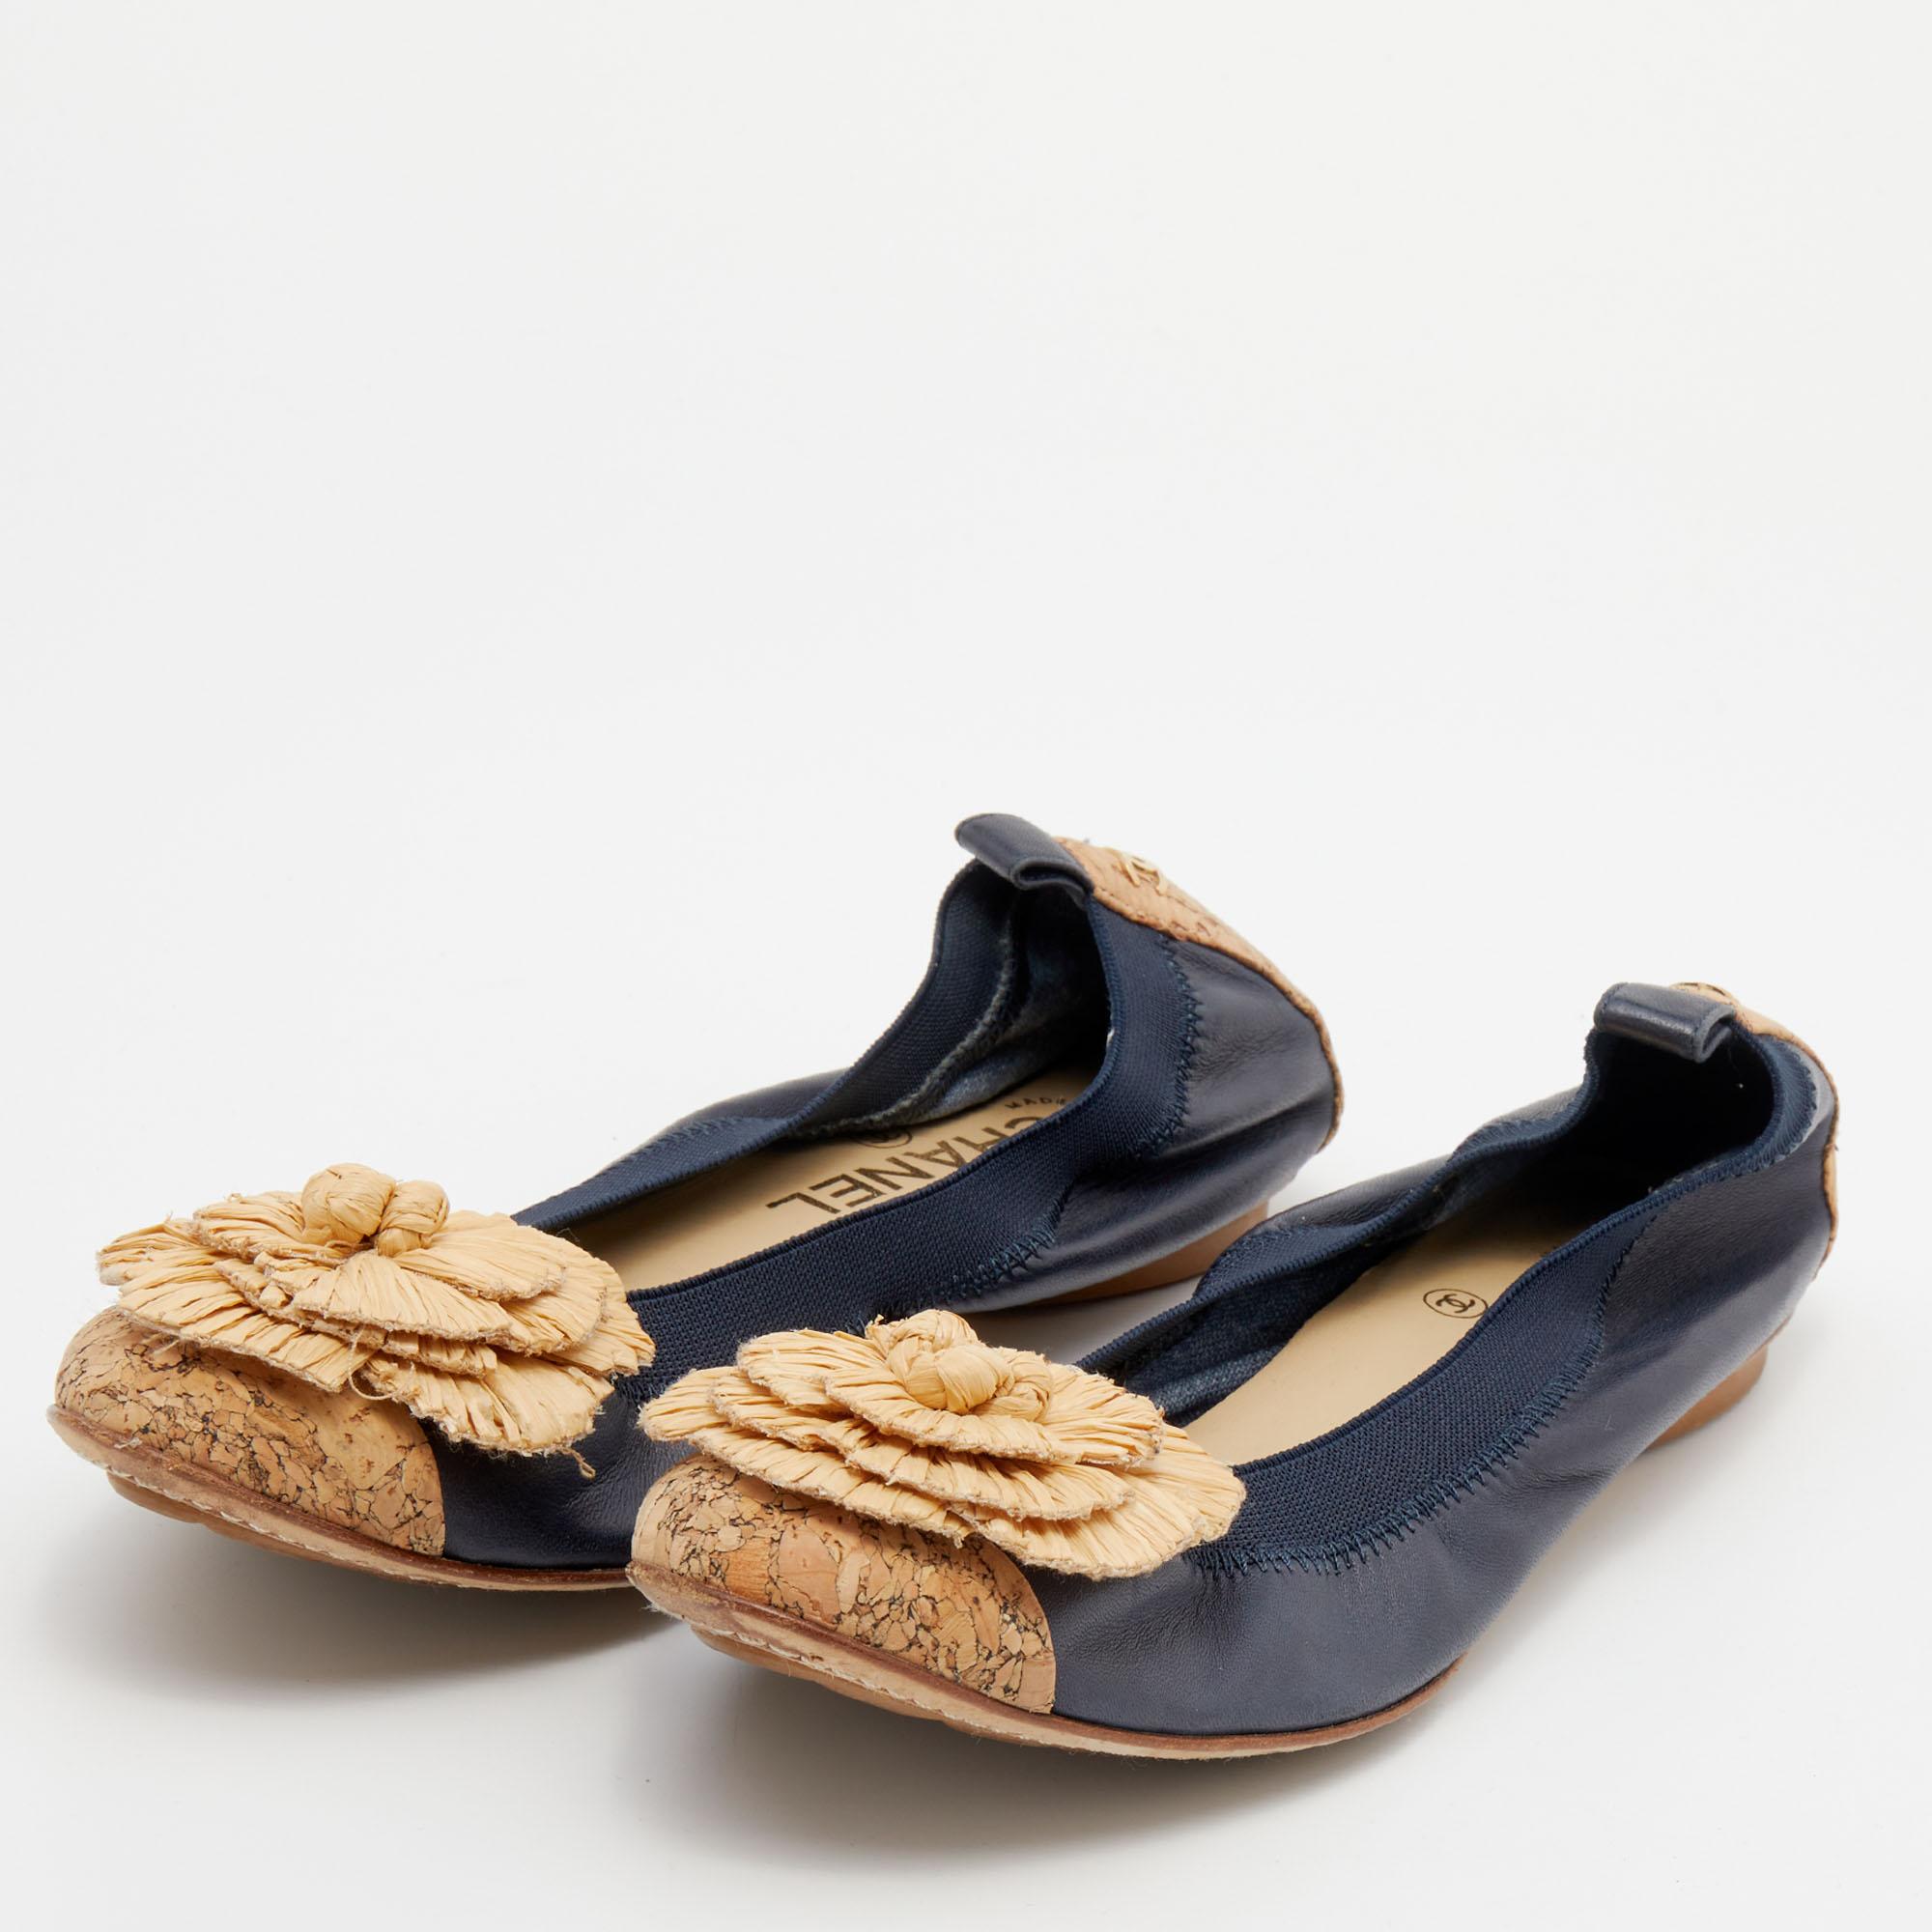 These classic ballet flats from Chanel are an ideal choice as they exude oodles of style. Not compromising on comfort, these ballet flats are made of leather and come with cork cap toes and raffia Camelia flowers perched on the uppers.

Includes: